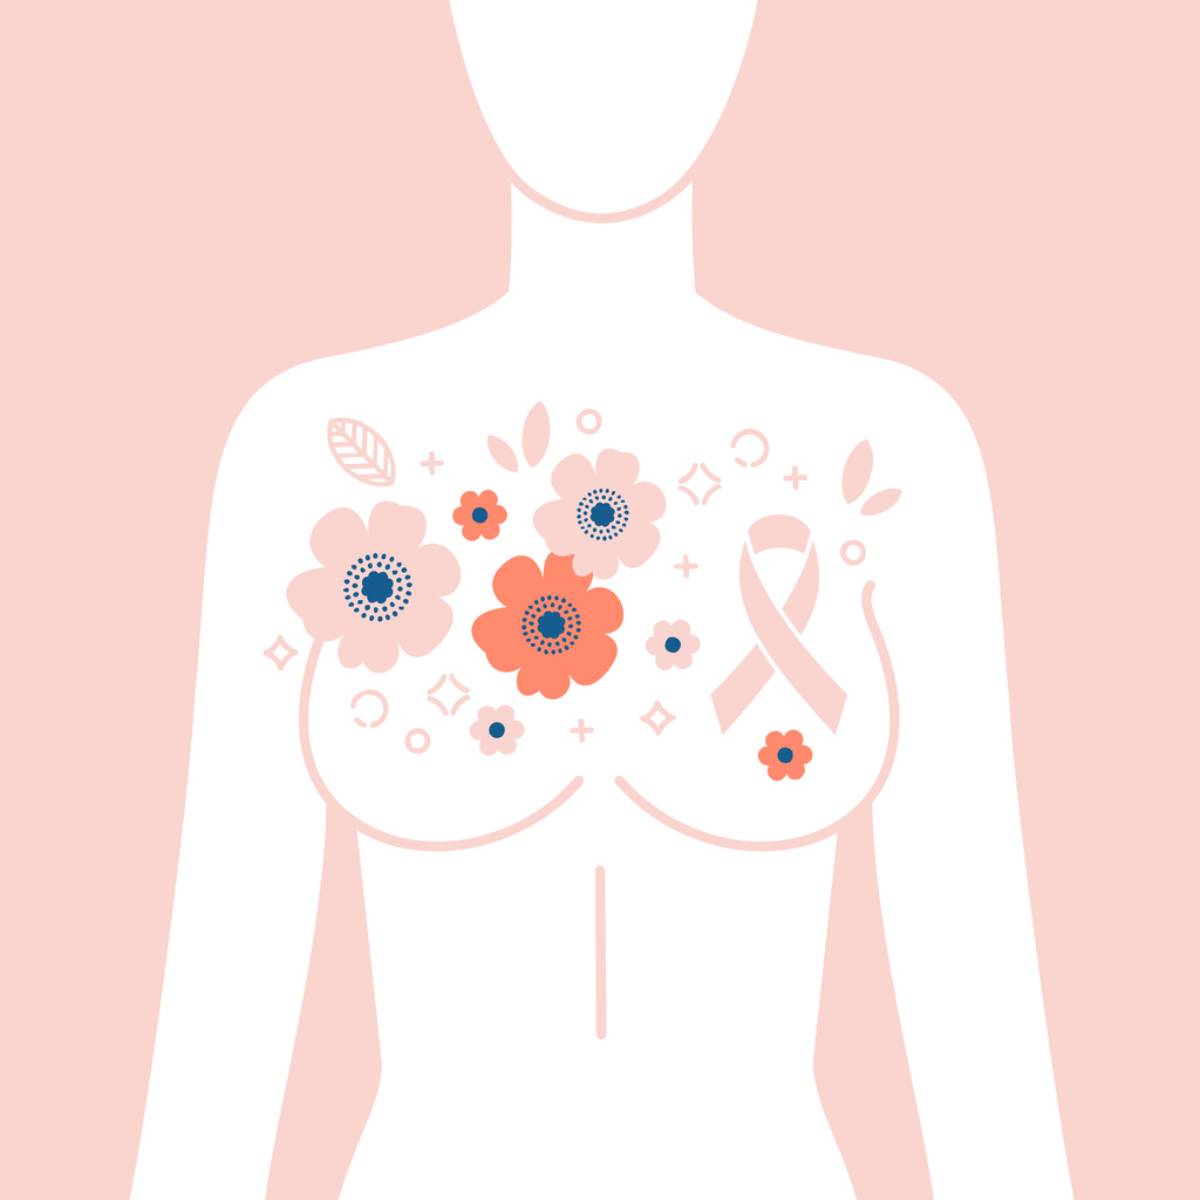 Options after mastectomy.